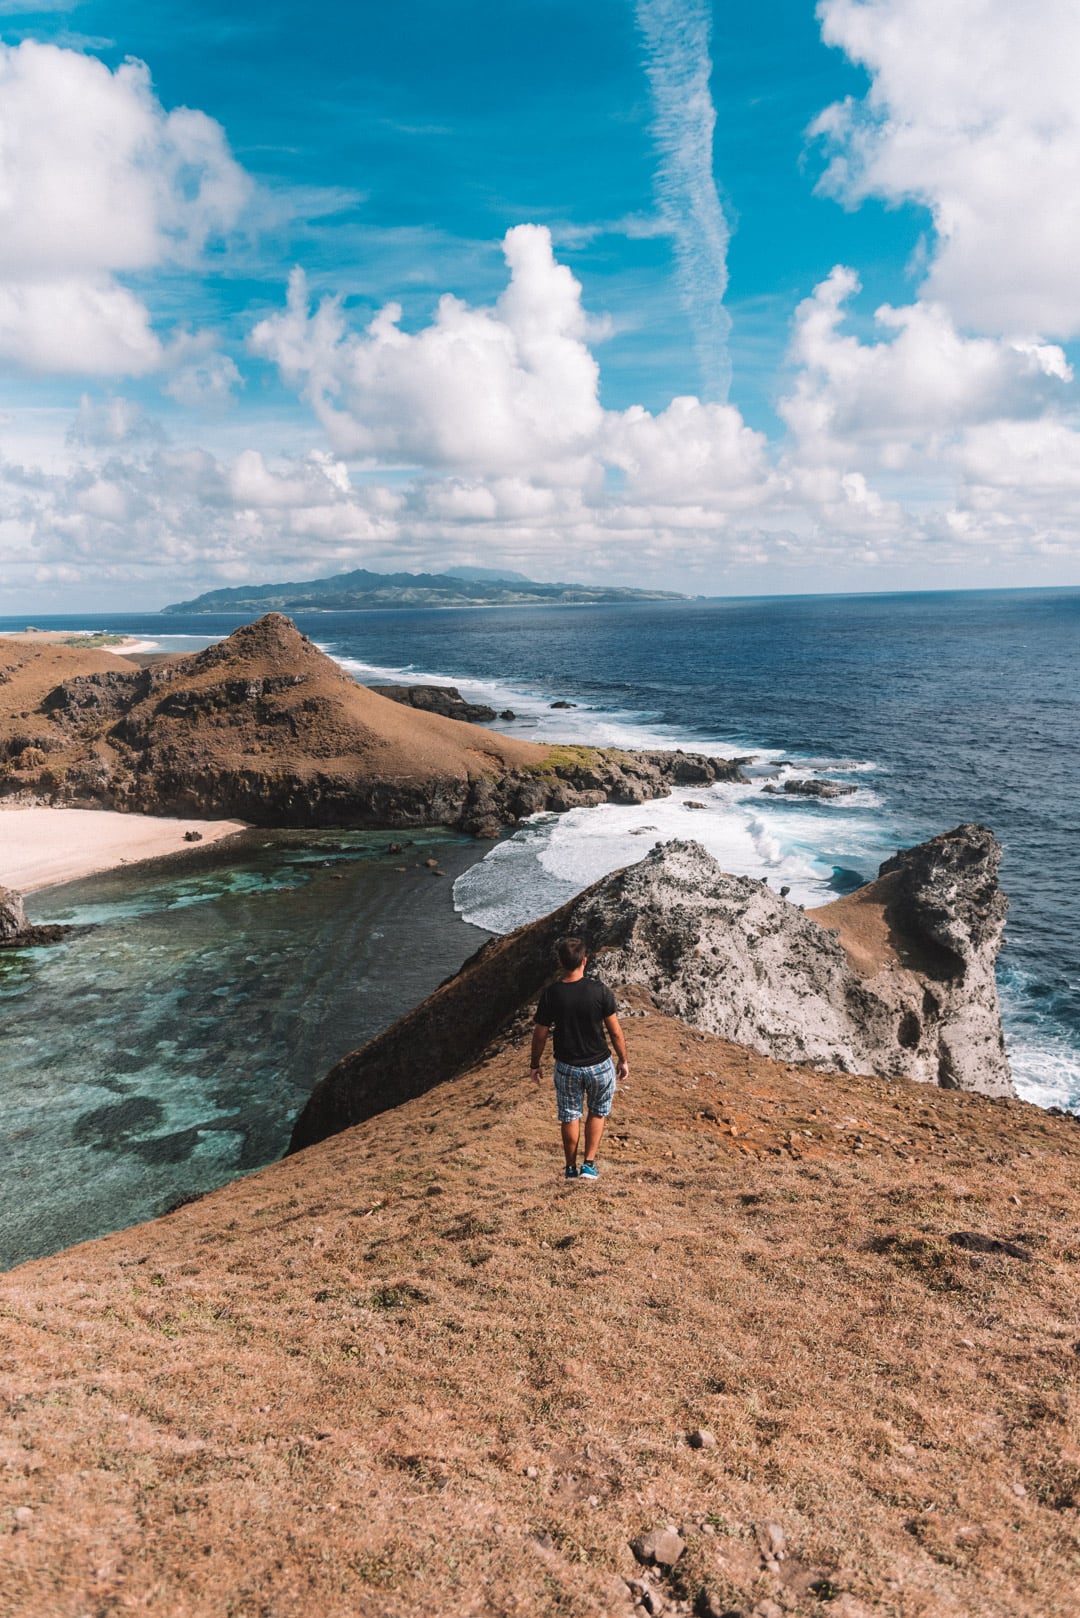 Things to do in Batanes, Transportation around Batanes, Batanes tourist spots, atms in batanes, wifi connection in batanes, how to go to Batanes, Sabtang island, tinan viewpoint